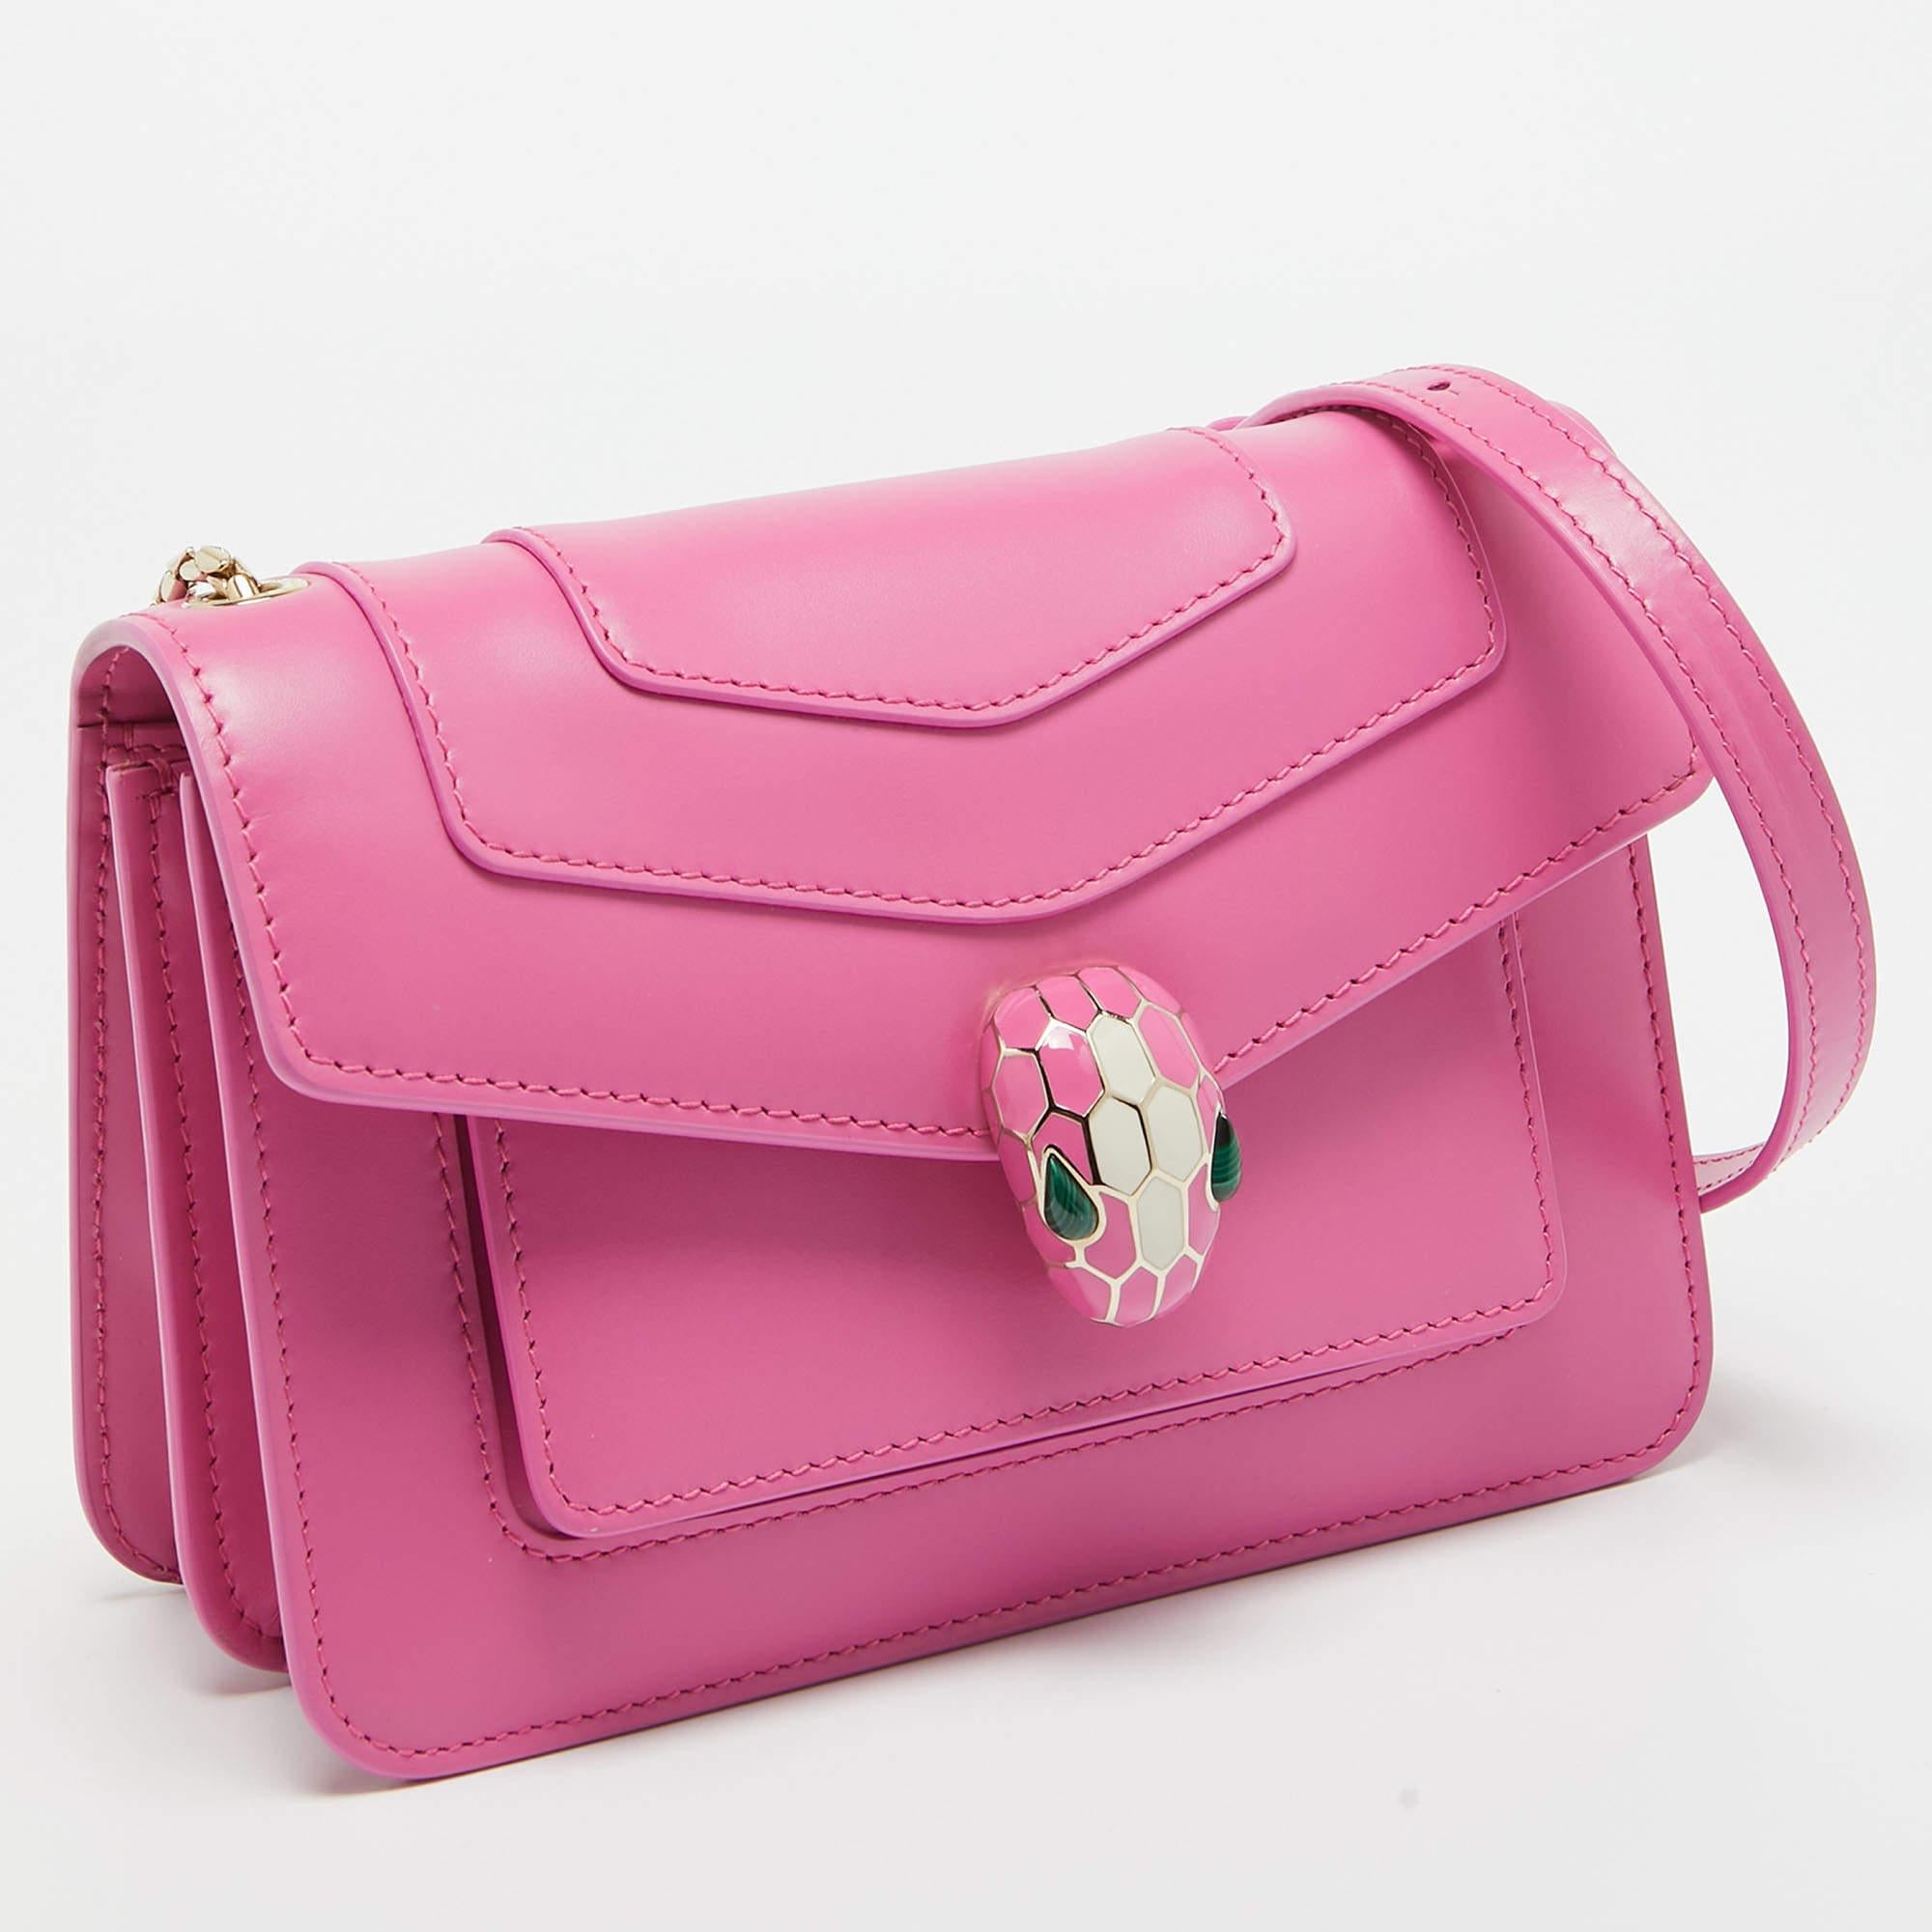 Bvlgari Pink Leather Small Serpenti Forever Shoulder Bag 1